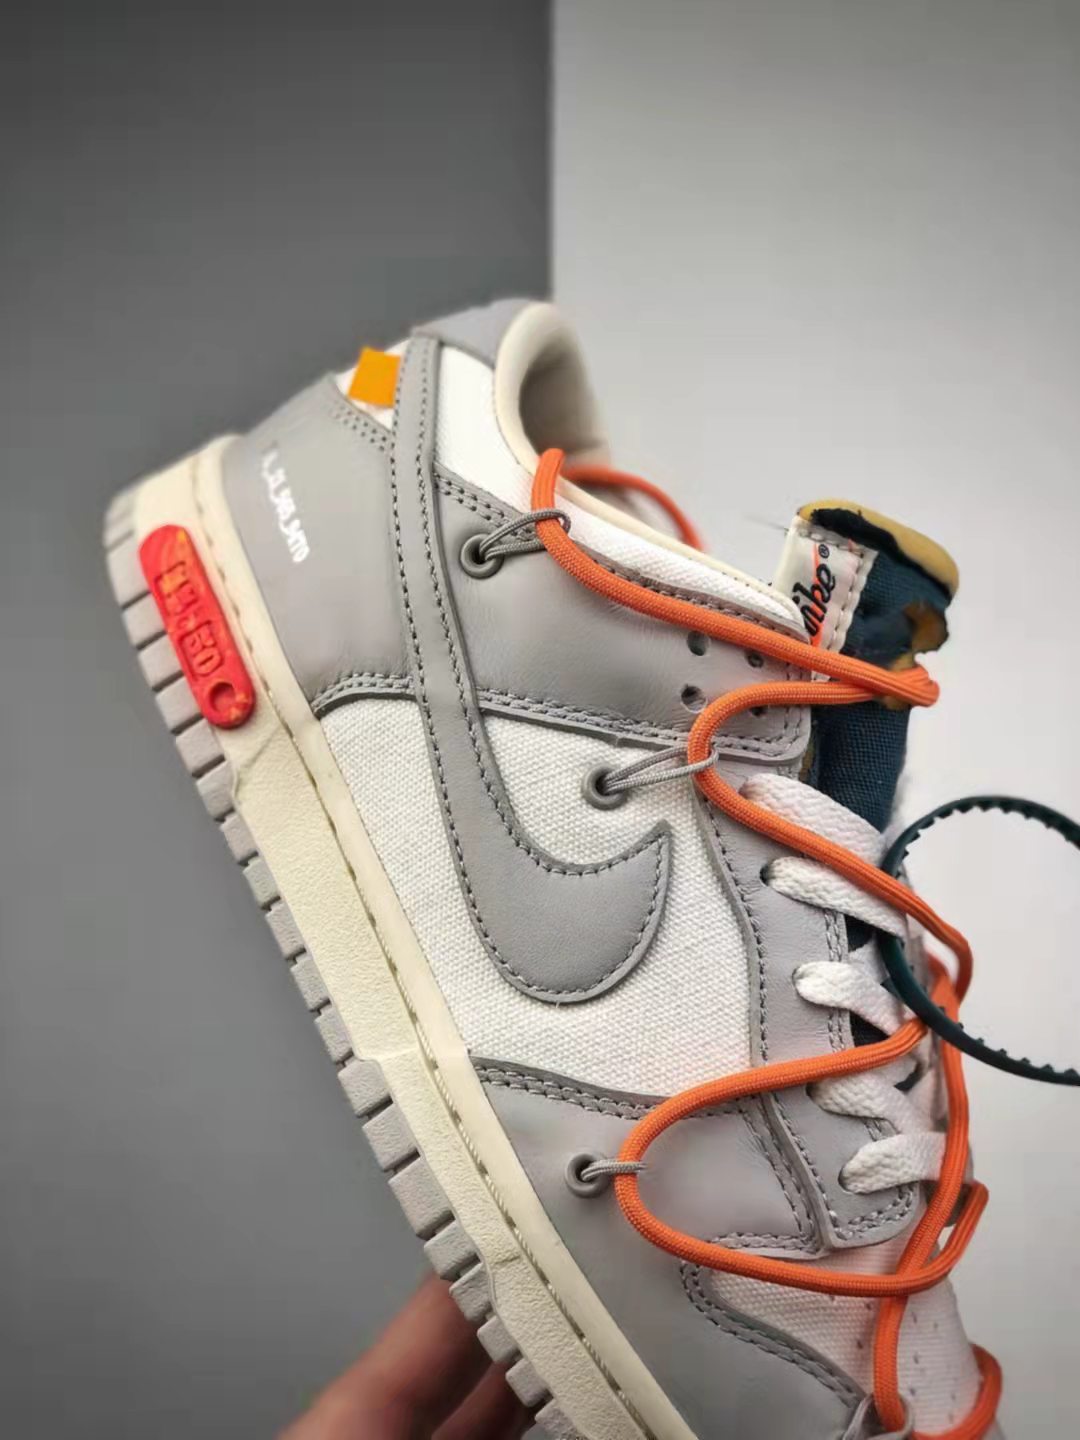 Nike Off-White x Dunk Low 'Lot 44 of 50' DM1602-104 - Limited Edition Sneakers